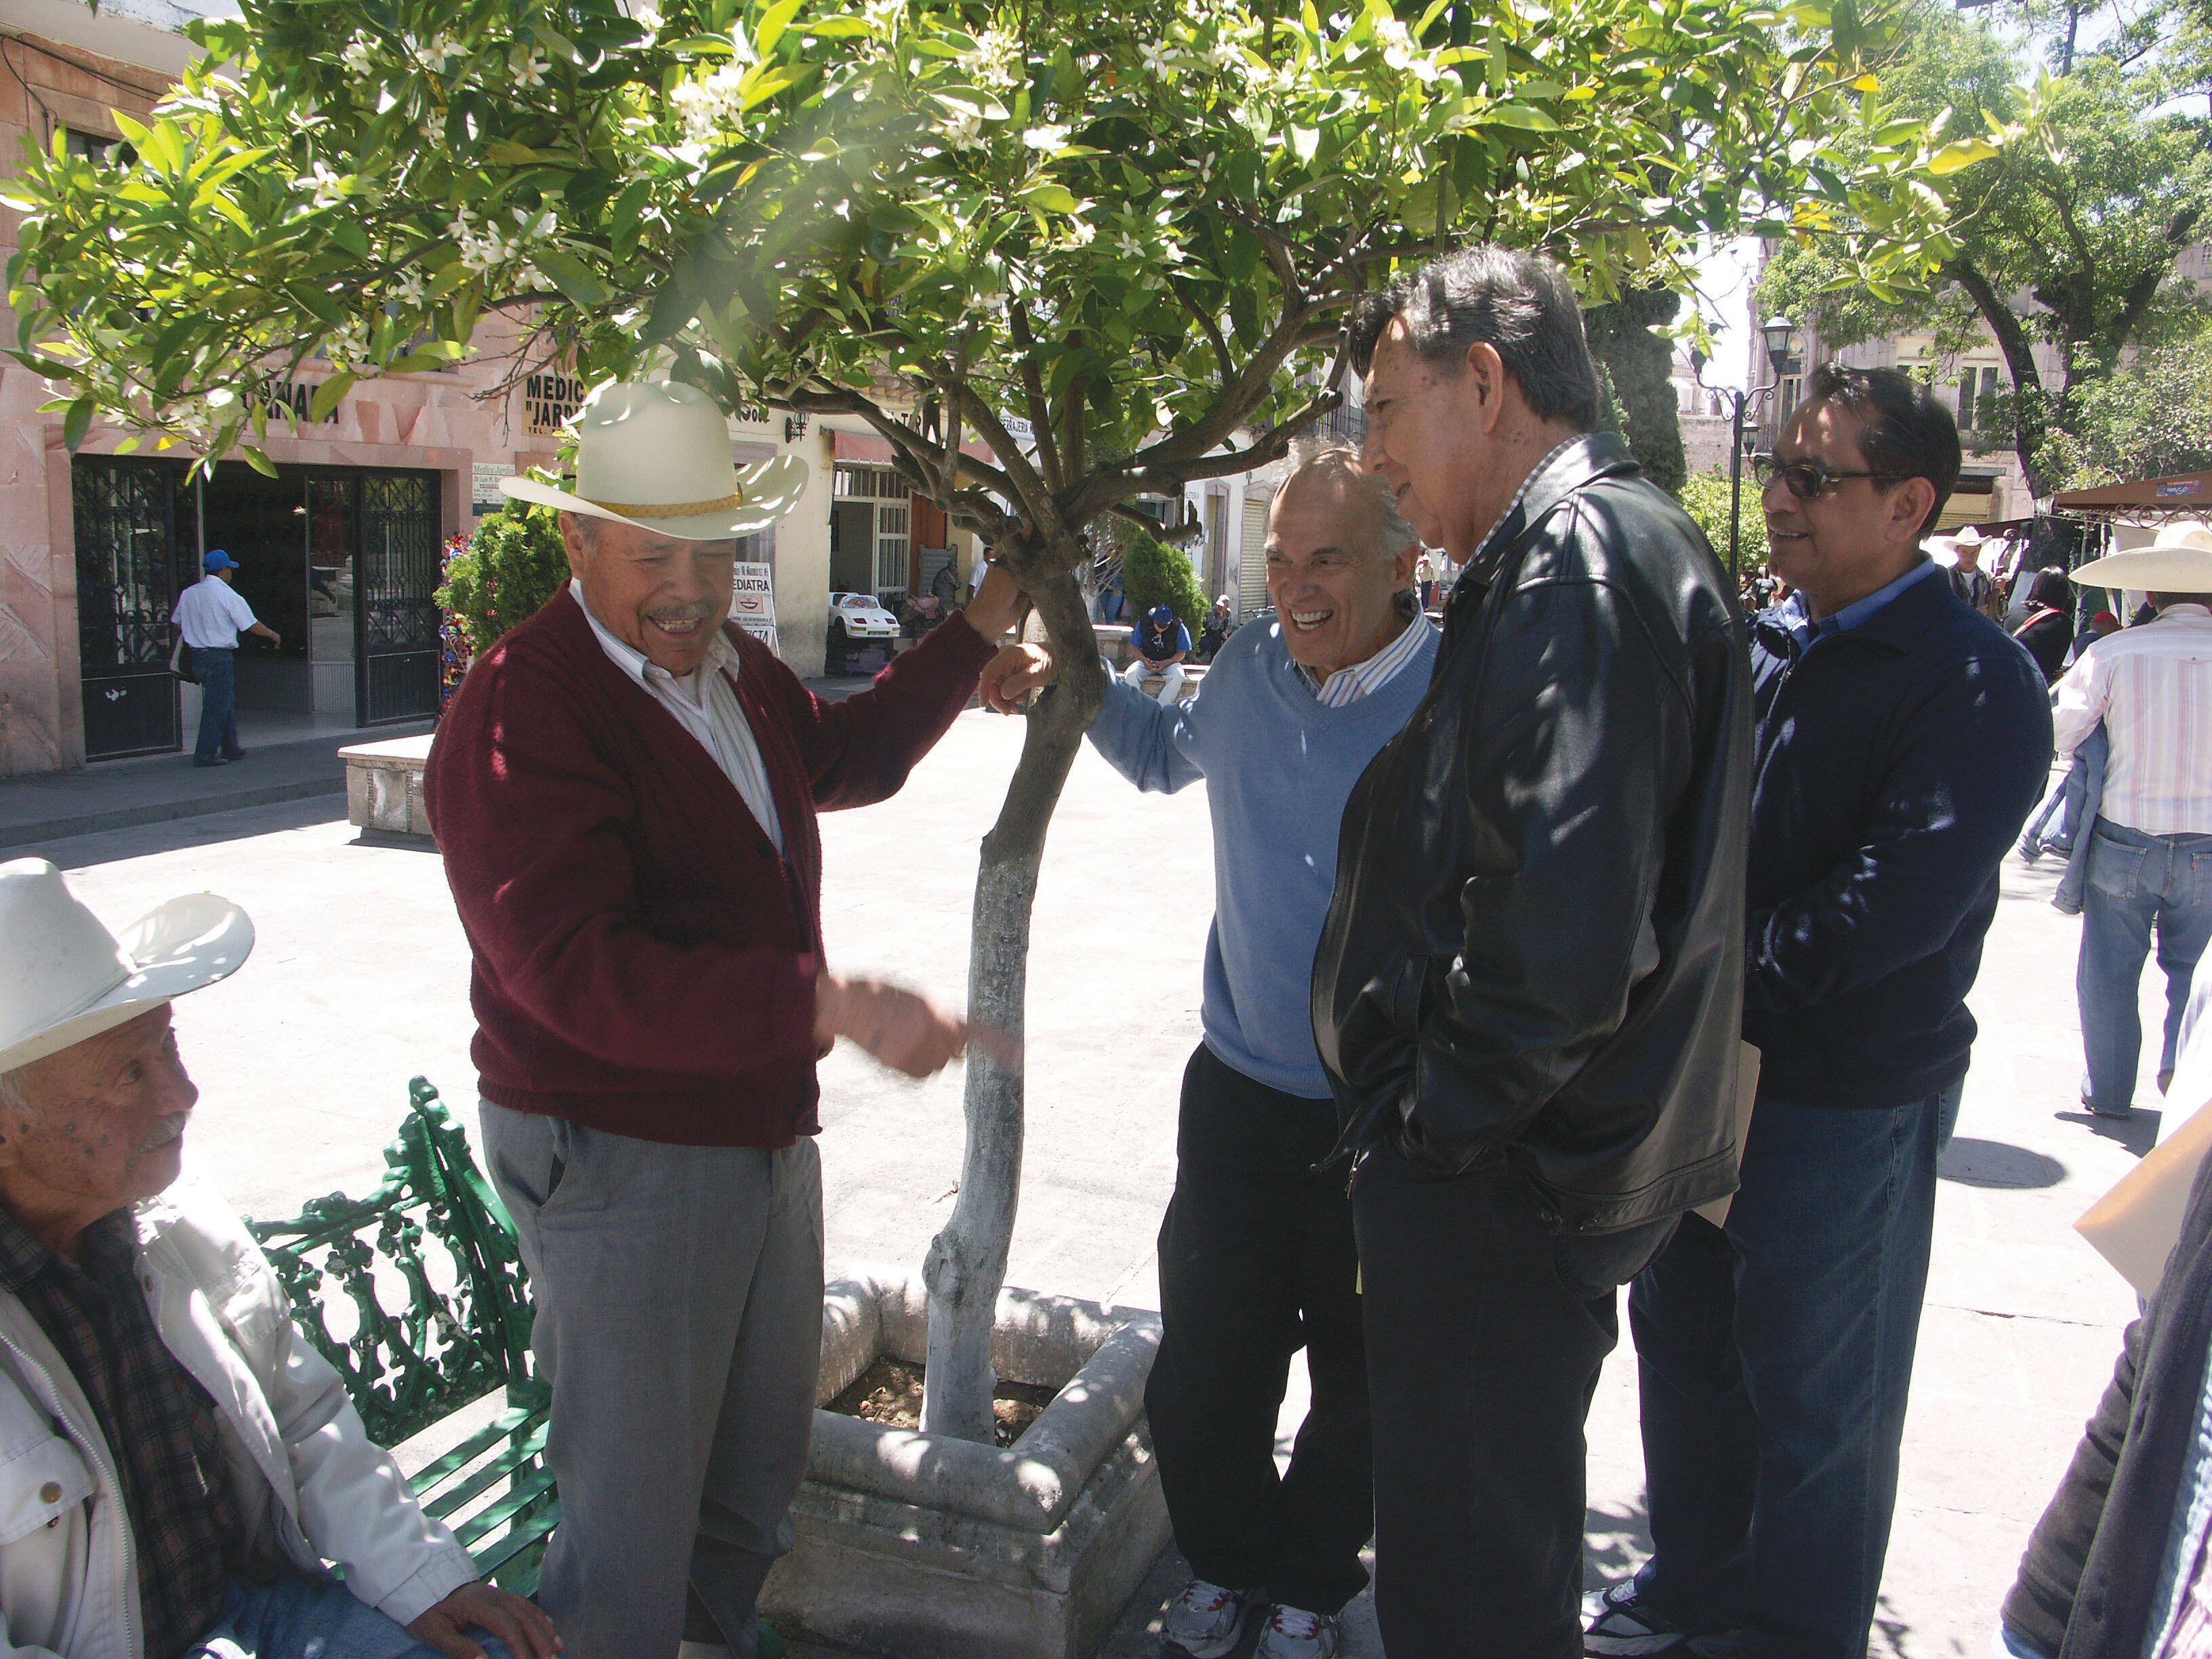 Harley Shaiken, Cuauhtémoc Cárdenas. and Gil Cedillo speak with local residents in the main plaza in Jerez, Mexico. (Photo by Dionicia Ramos.)